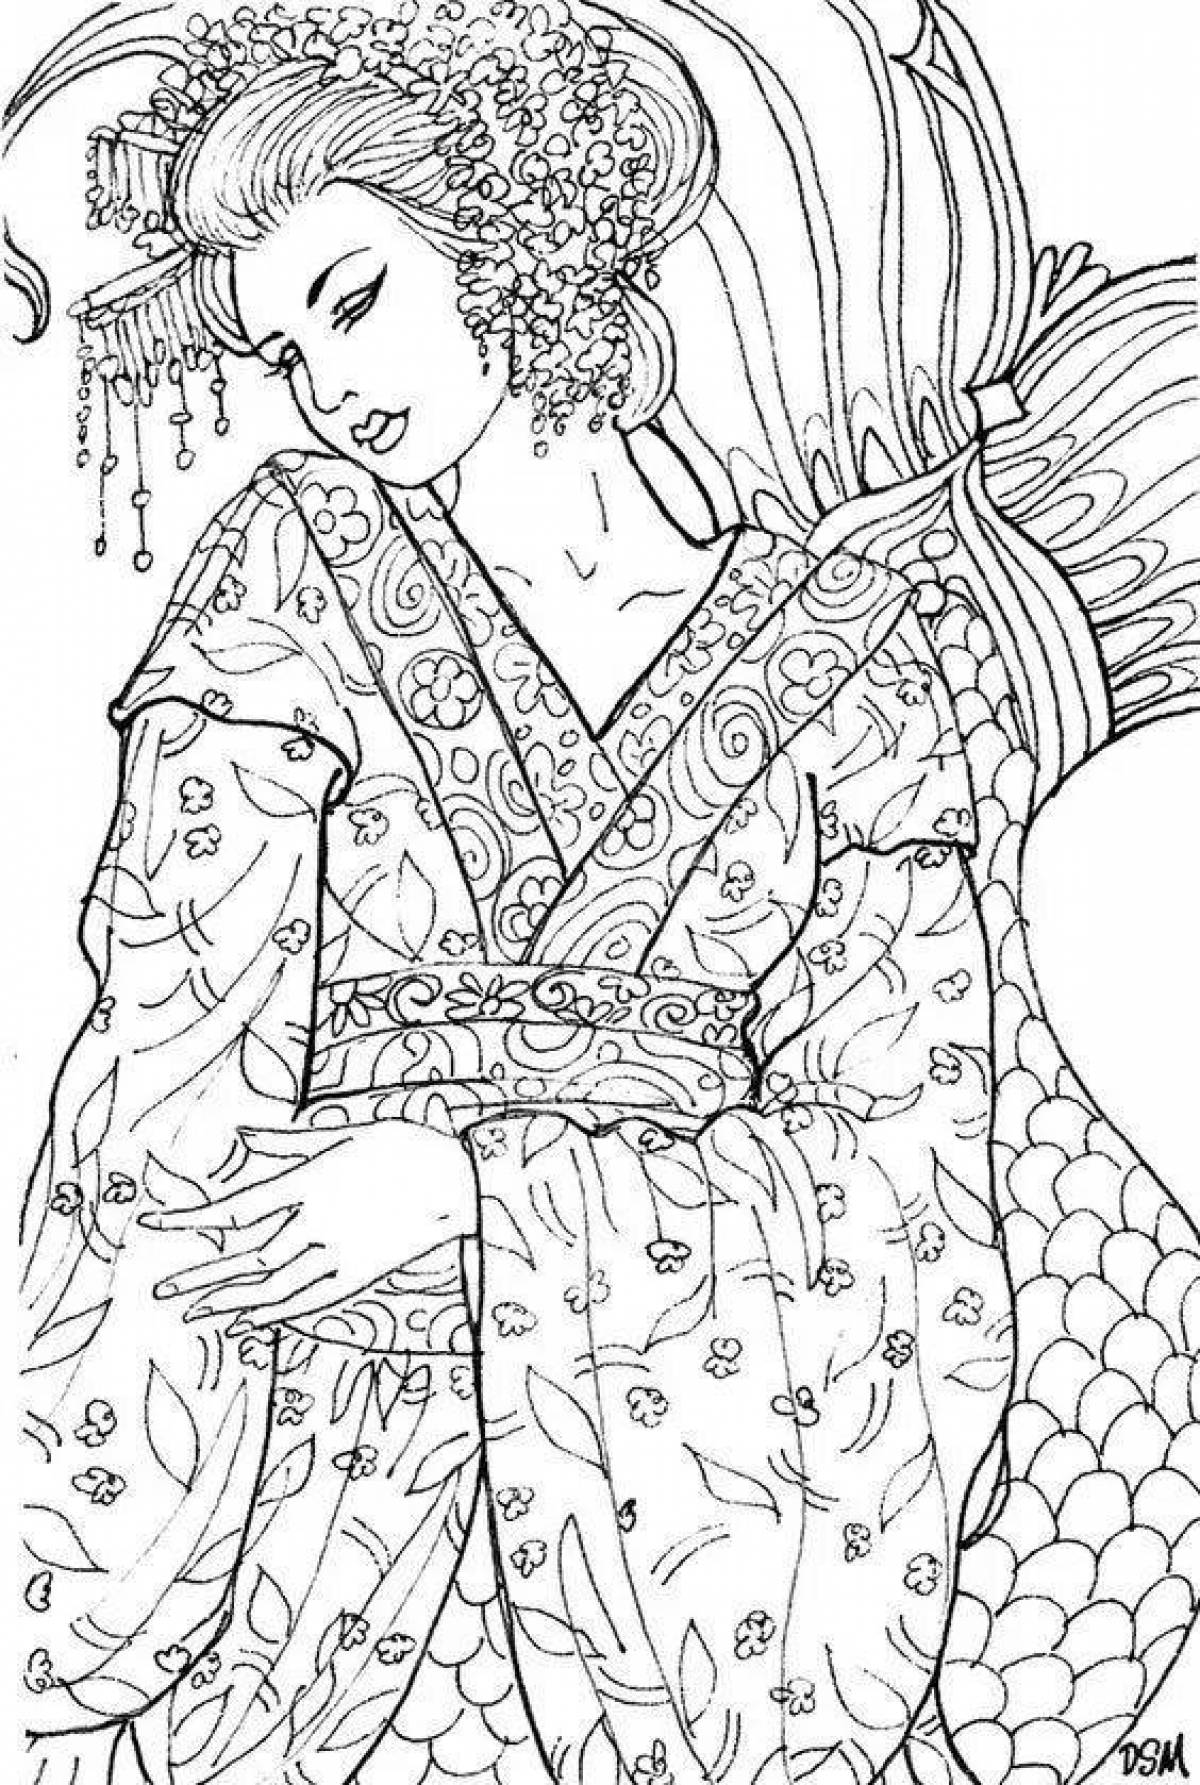 Exquisite Japanese girl coloring book